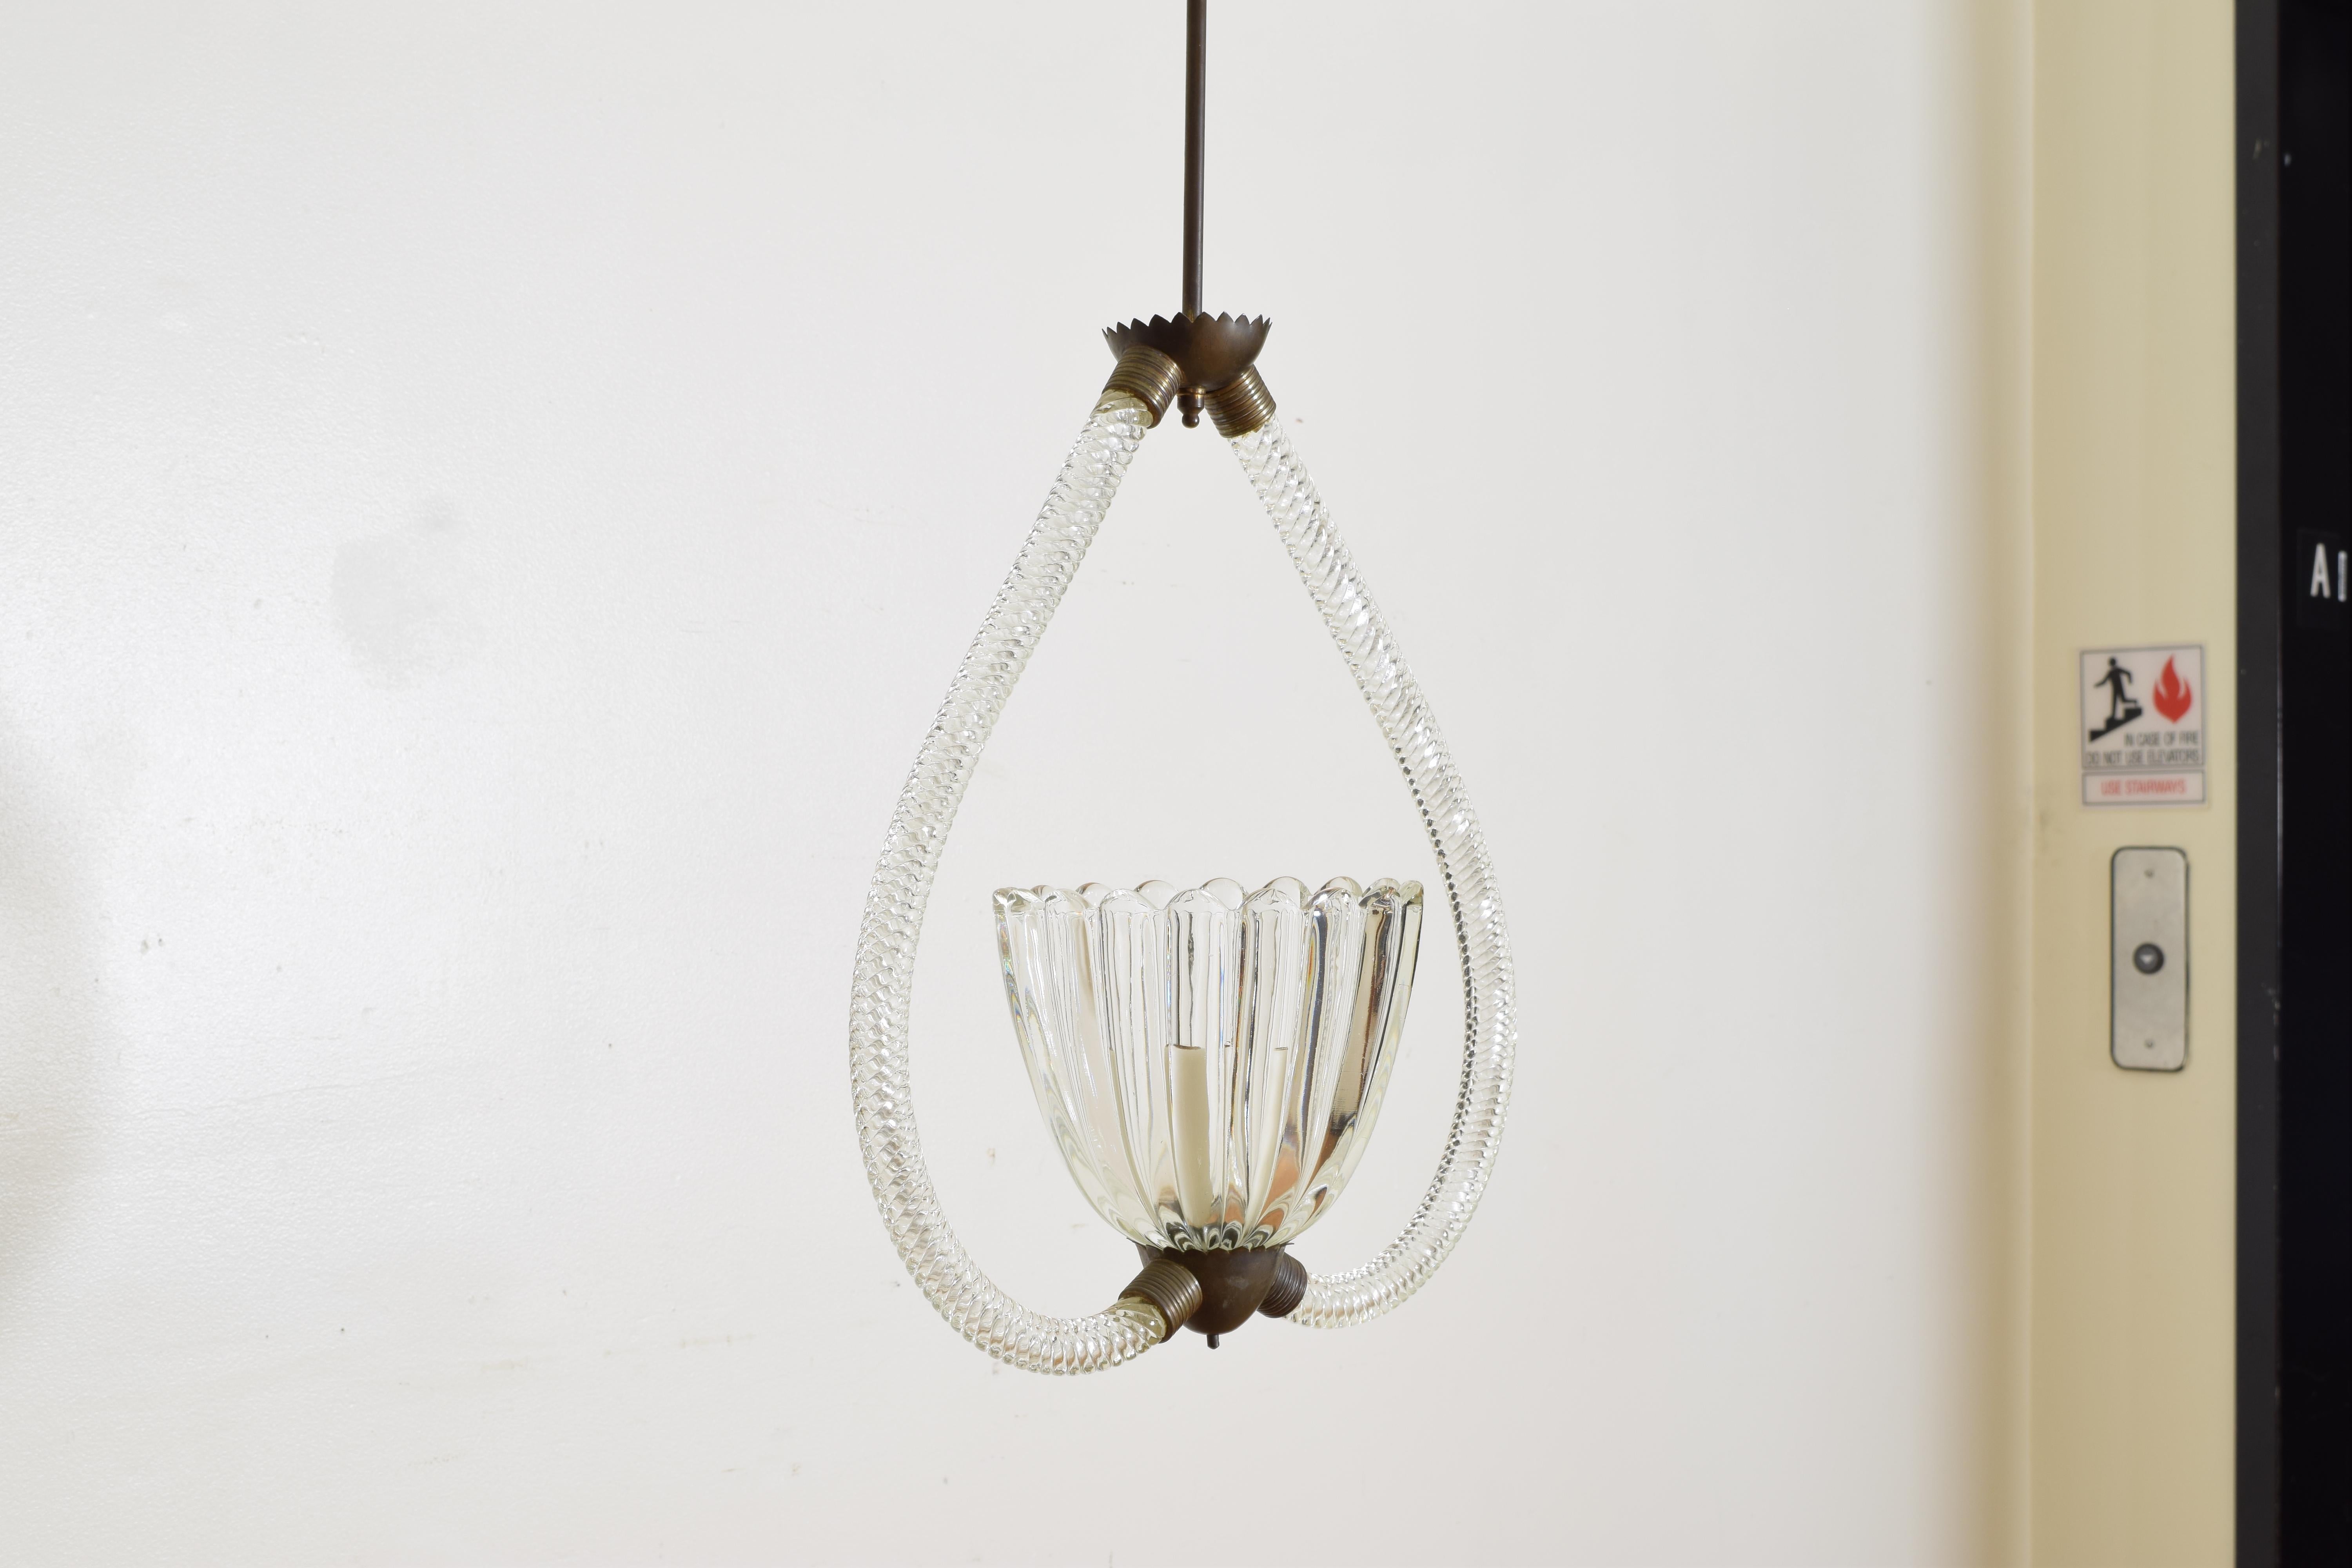 Hanging from a brass rod, the two blown and twisted glass arms curving to support a brass fitting issuing a large blown glass bobeche housing one socket